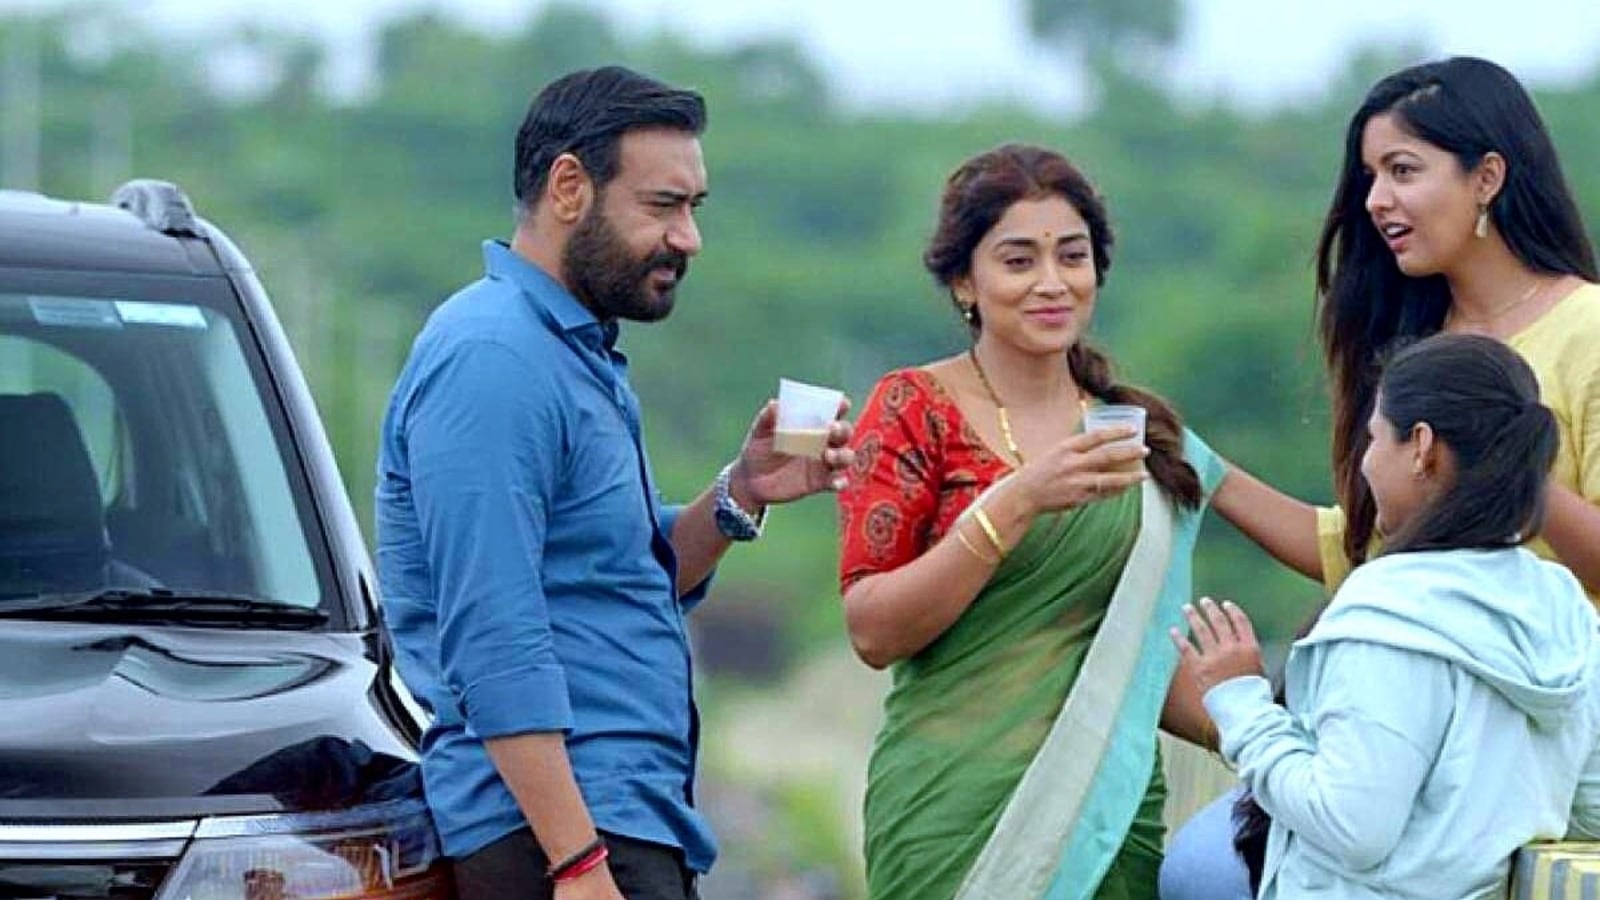 drishyam-2-box-office-success-sees-return-of-early-morning-midnight-shows-as-theatres-add-screens